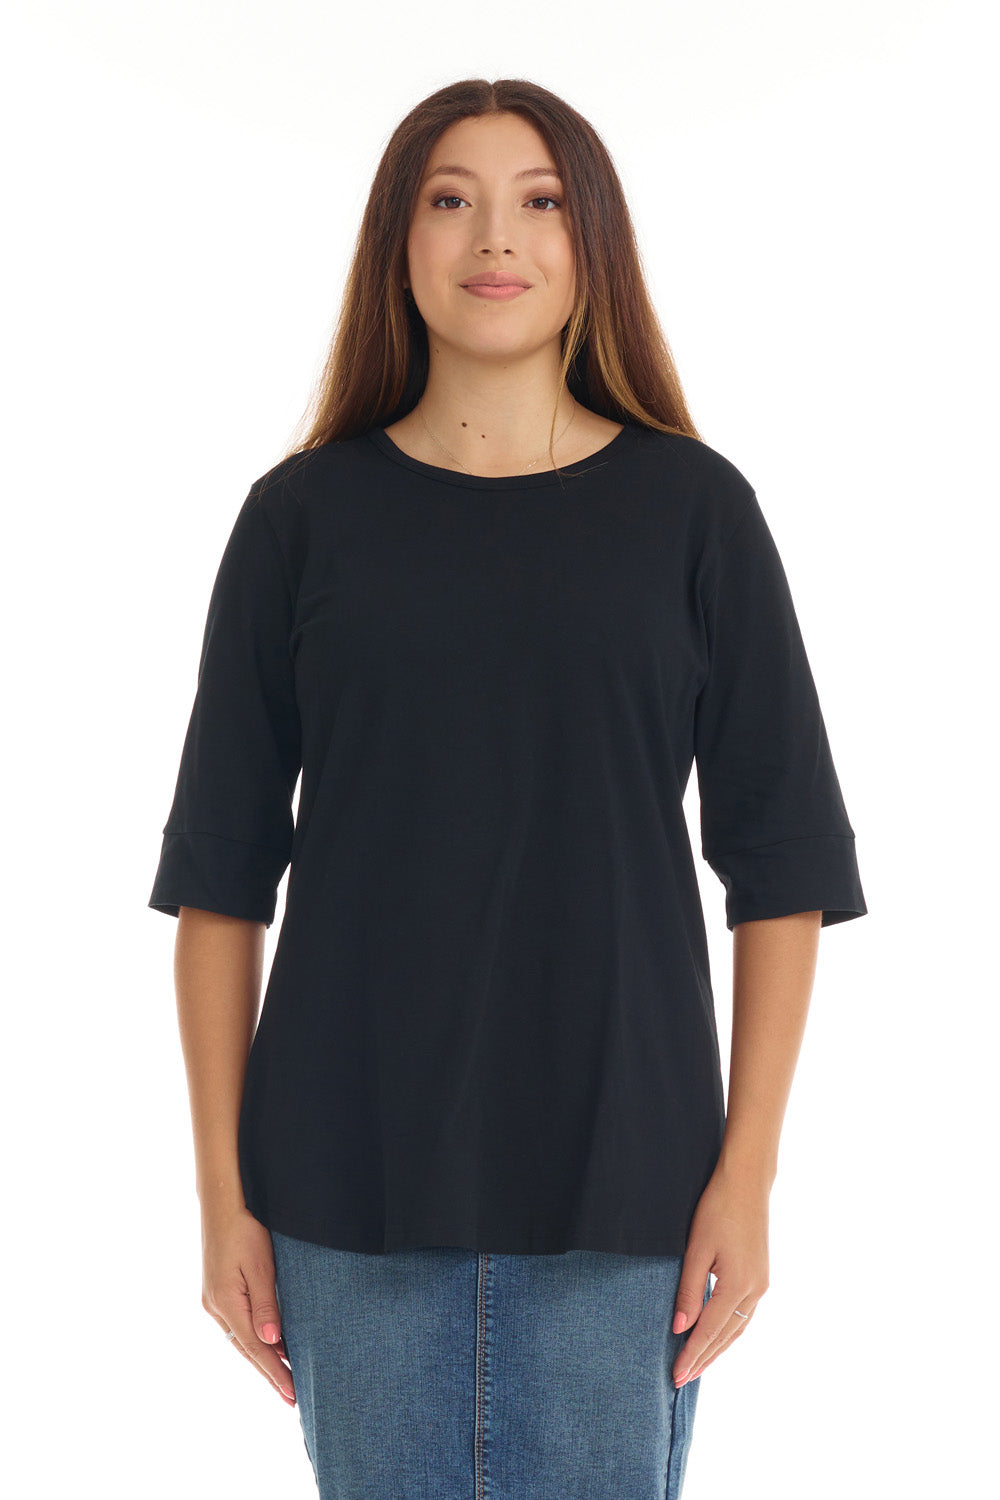 Womens Elbow Sleeve Cotton Tunic Top